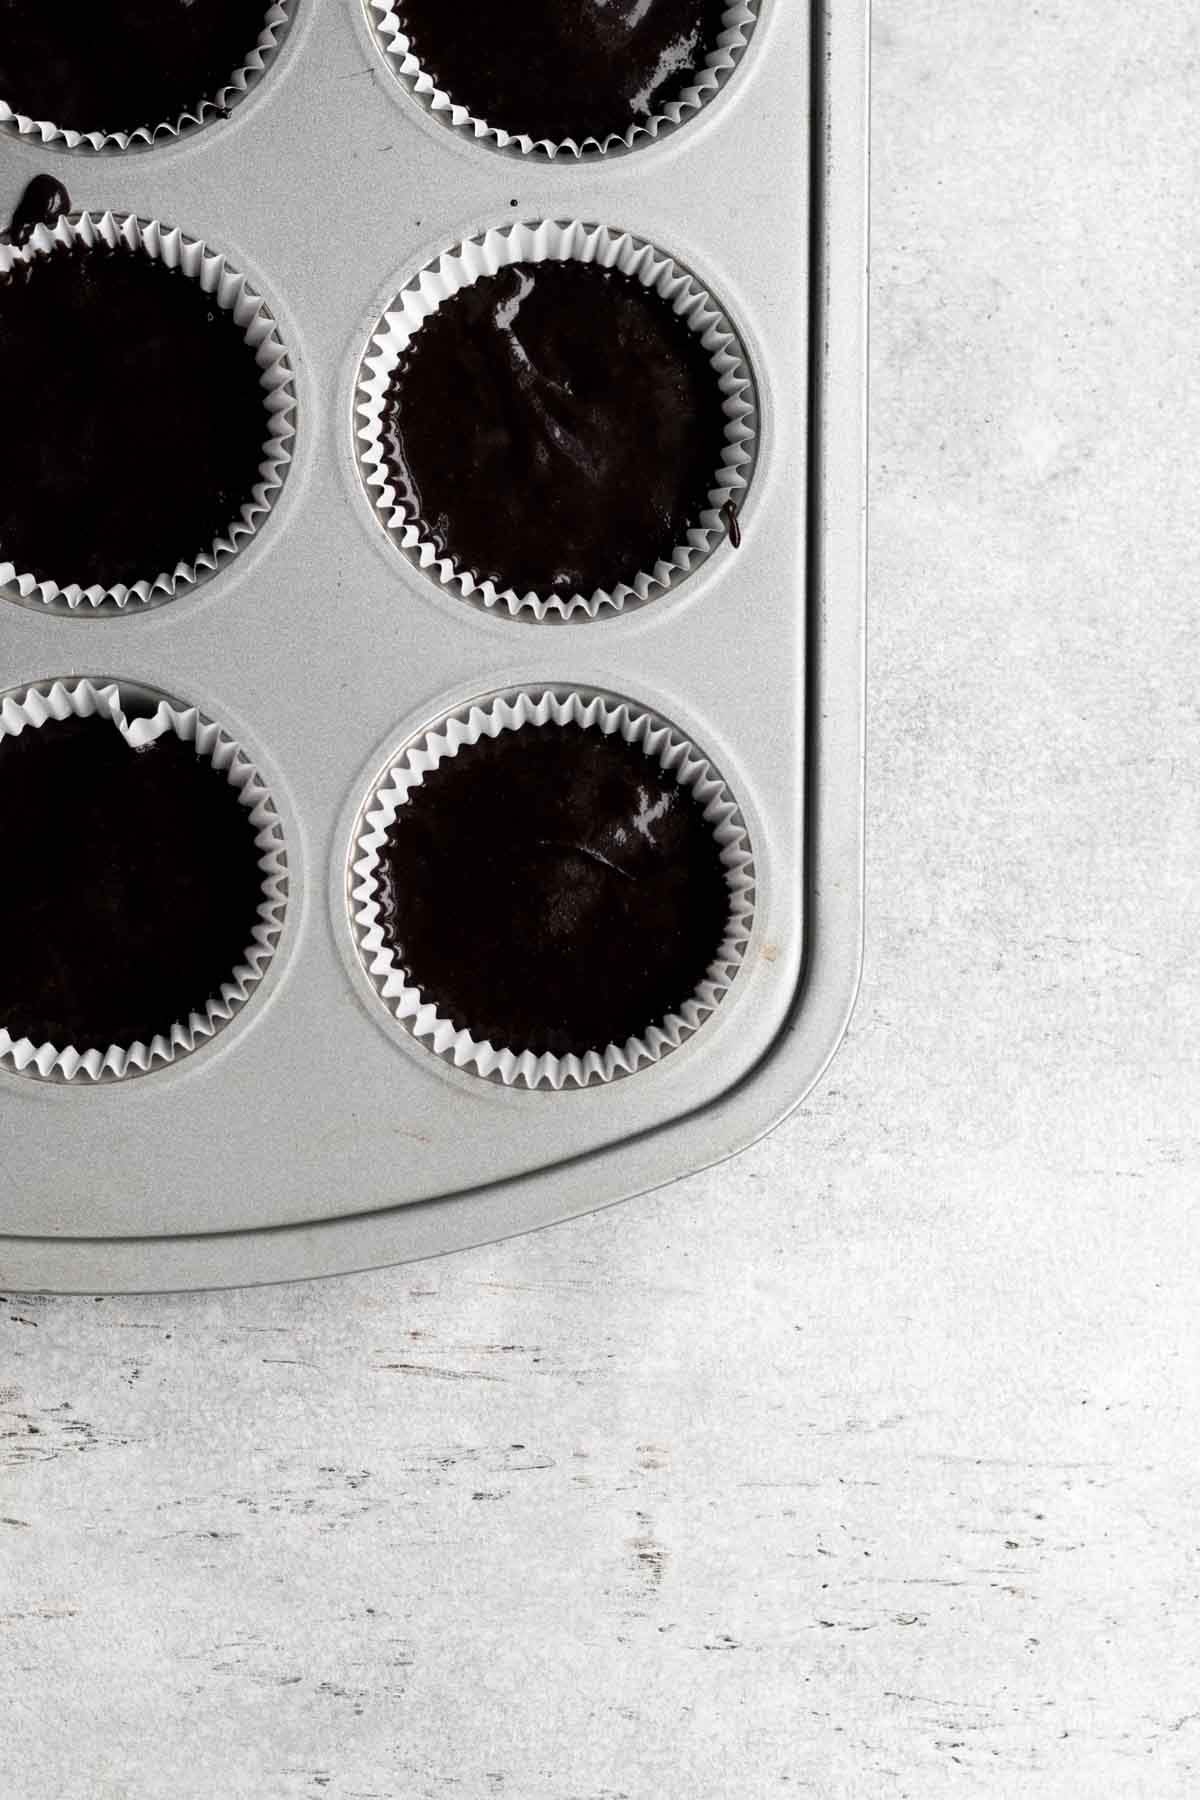 Cupcake tin filled with chocolate batter.